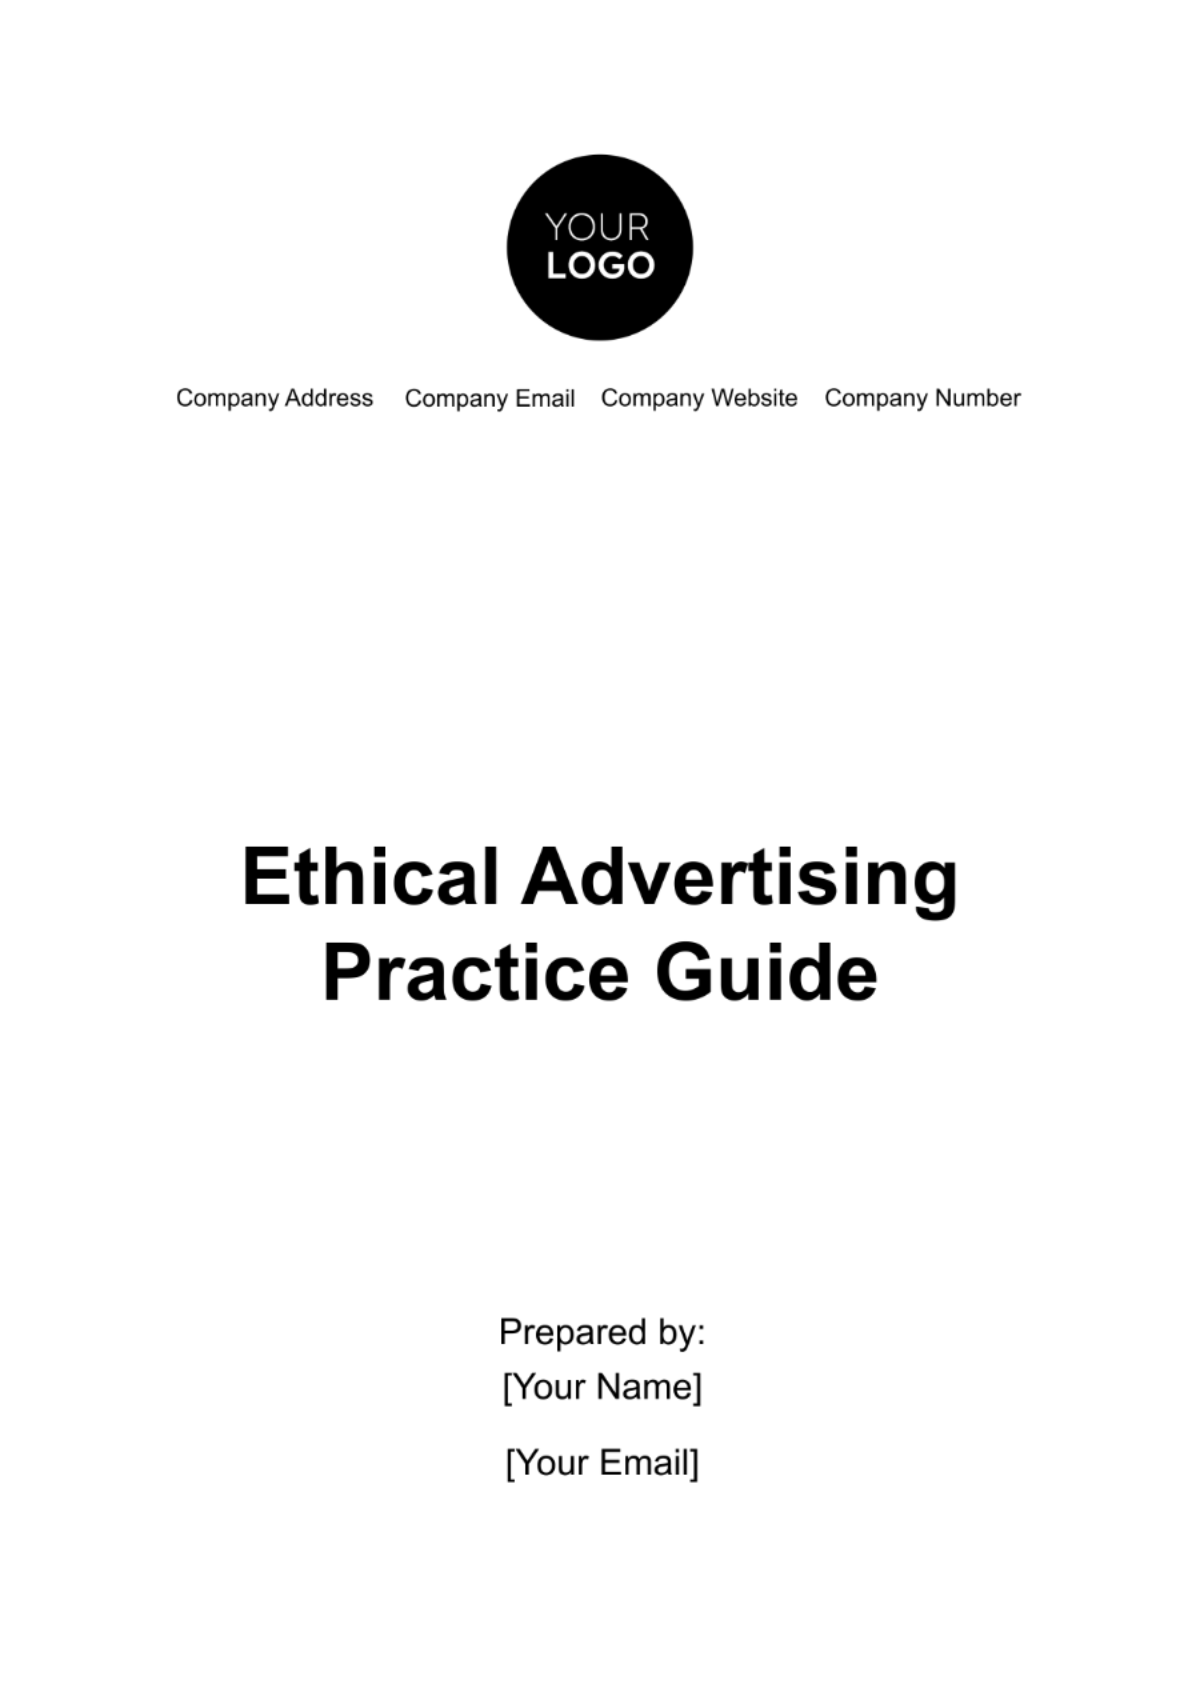 Ethical Advertising Practice Guide Template